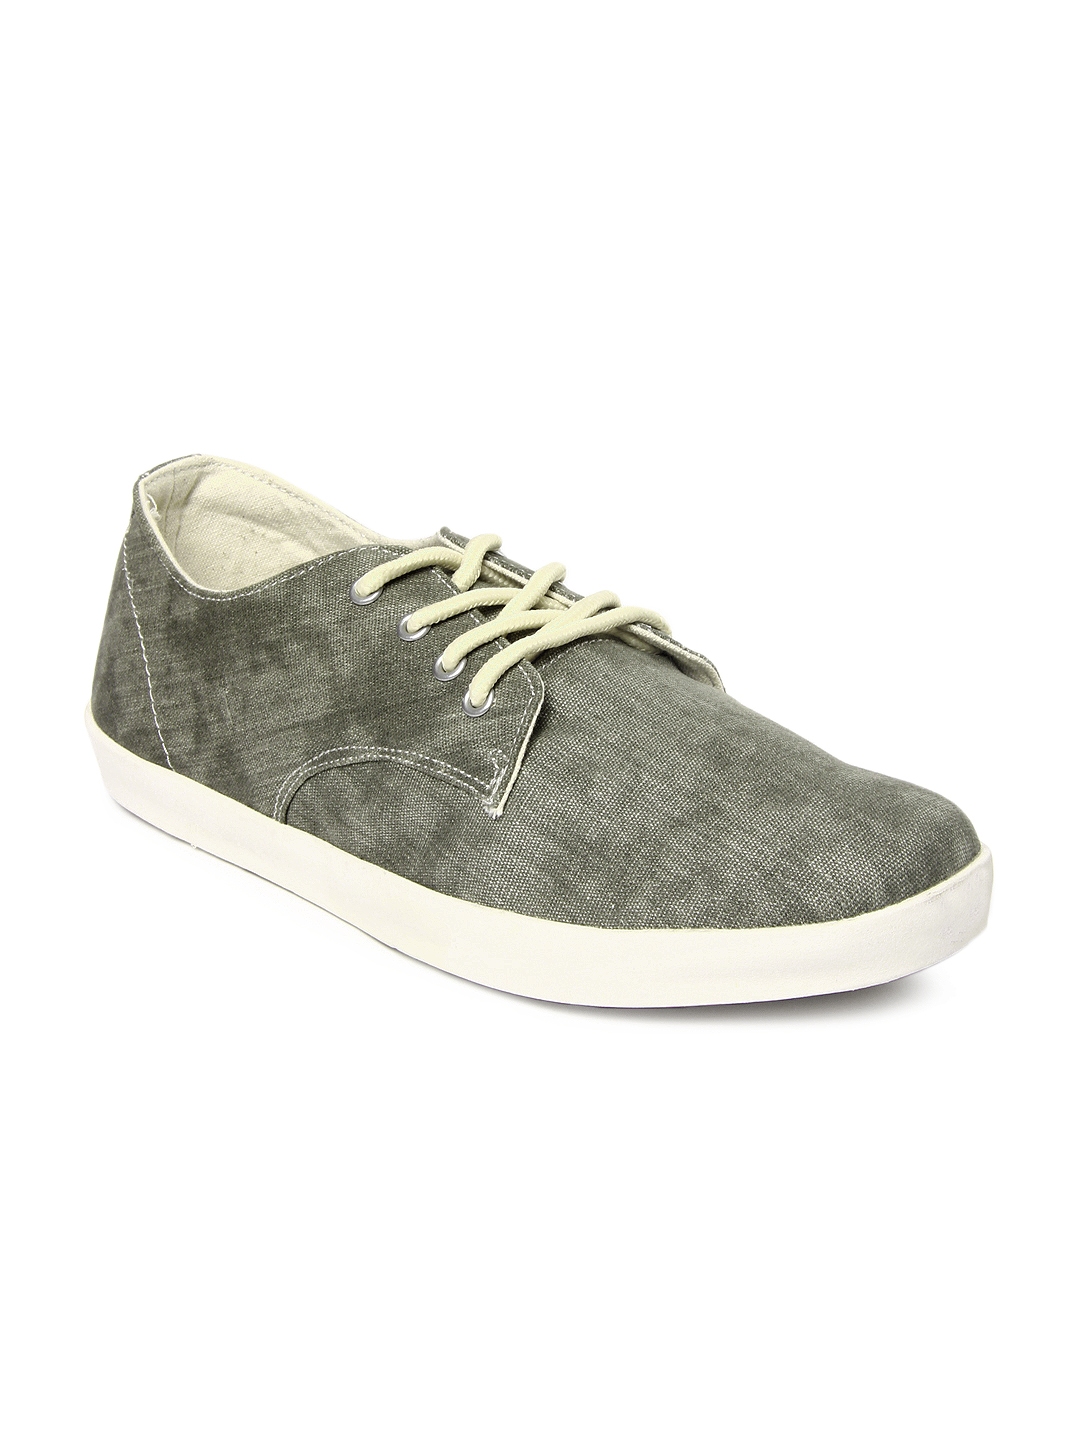 Buy Roadster Men Grey Casual Shoes Casual Shoes For Men 248713 Myntra 8245